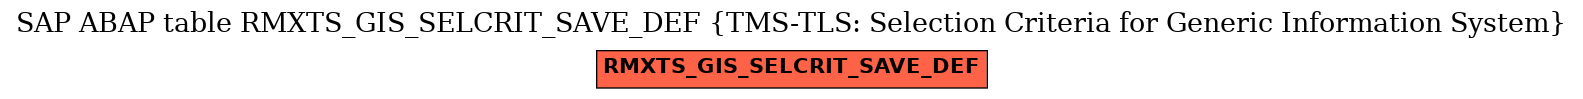 E-R Diagram for table RMXTS_GIS_SELCRIT_SAVE_DEF (TMS-TLS: Selection Criteria for Generic Information System)